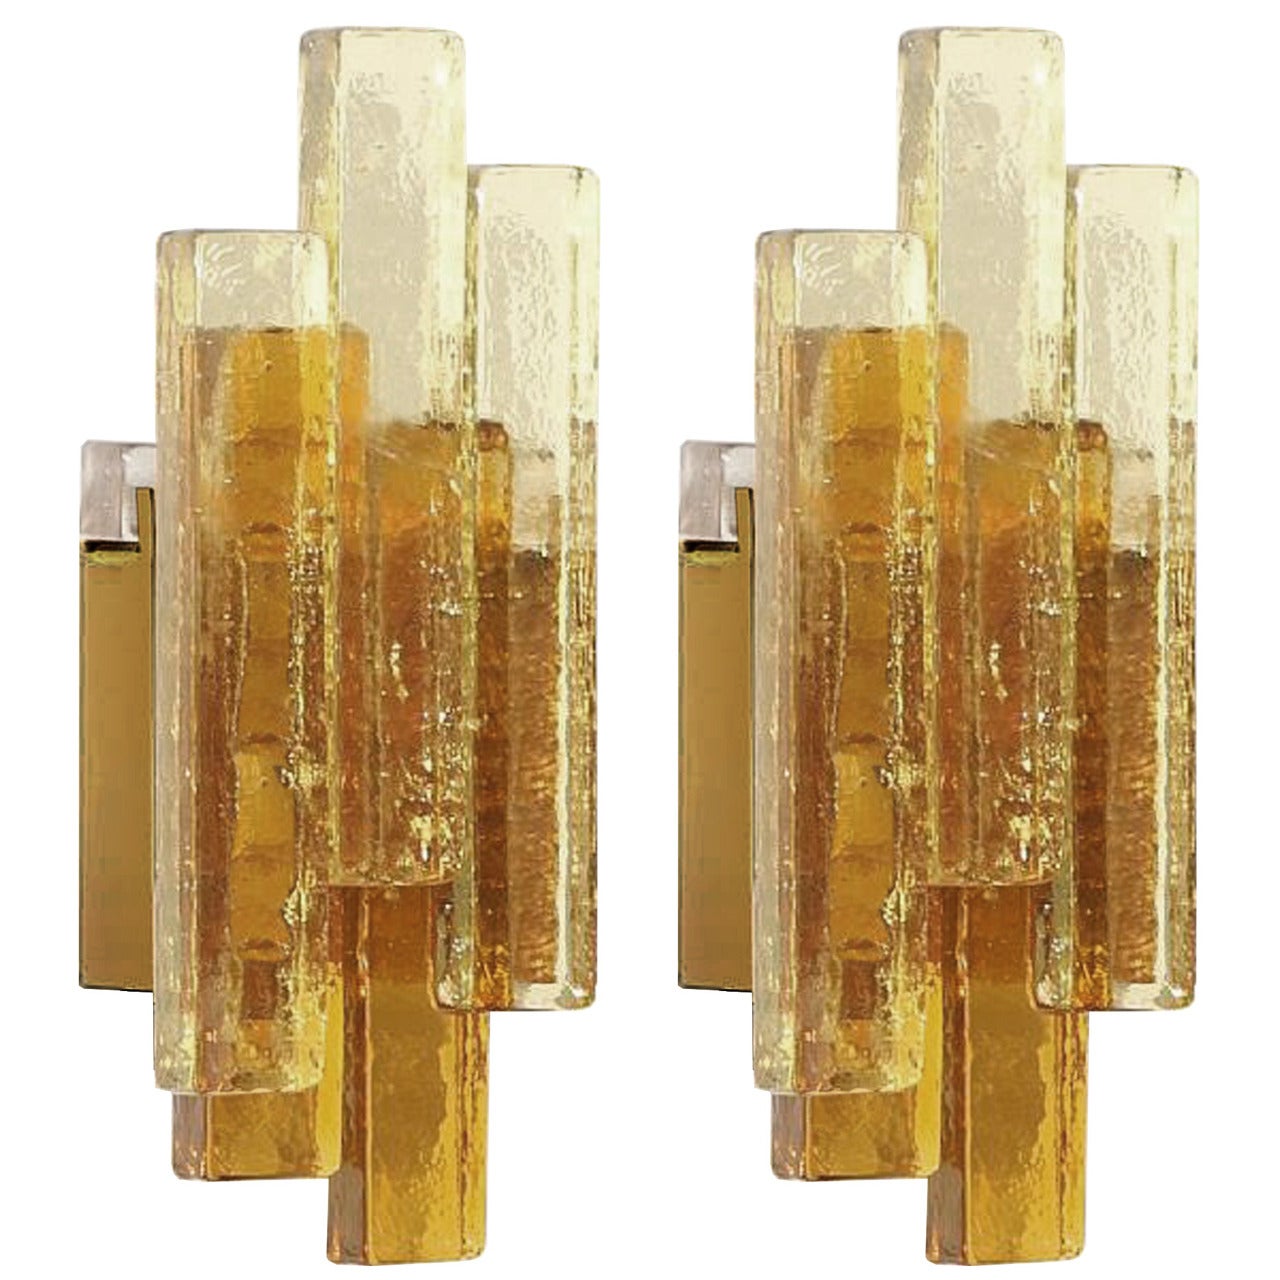 Pair of Amber Glass Sconces by Svend Aage Holm Sorensen, (two pair available) For Sale